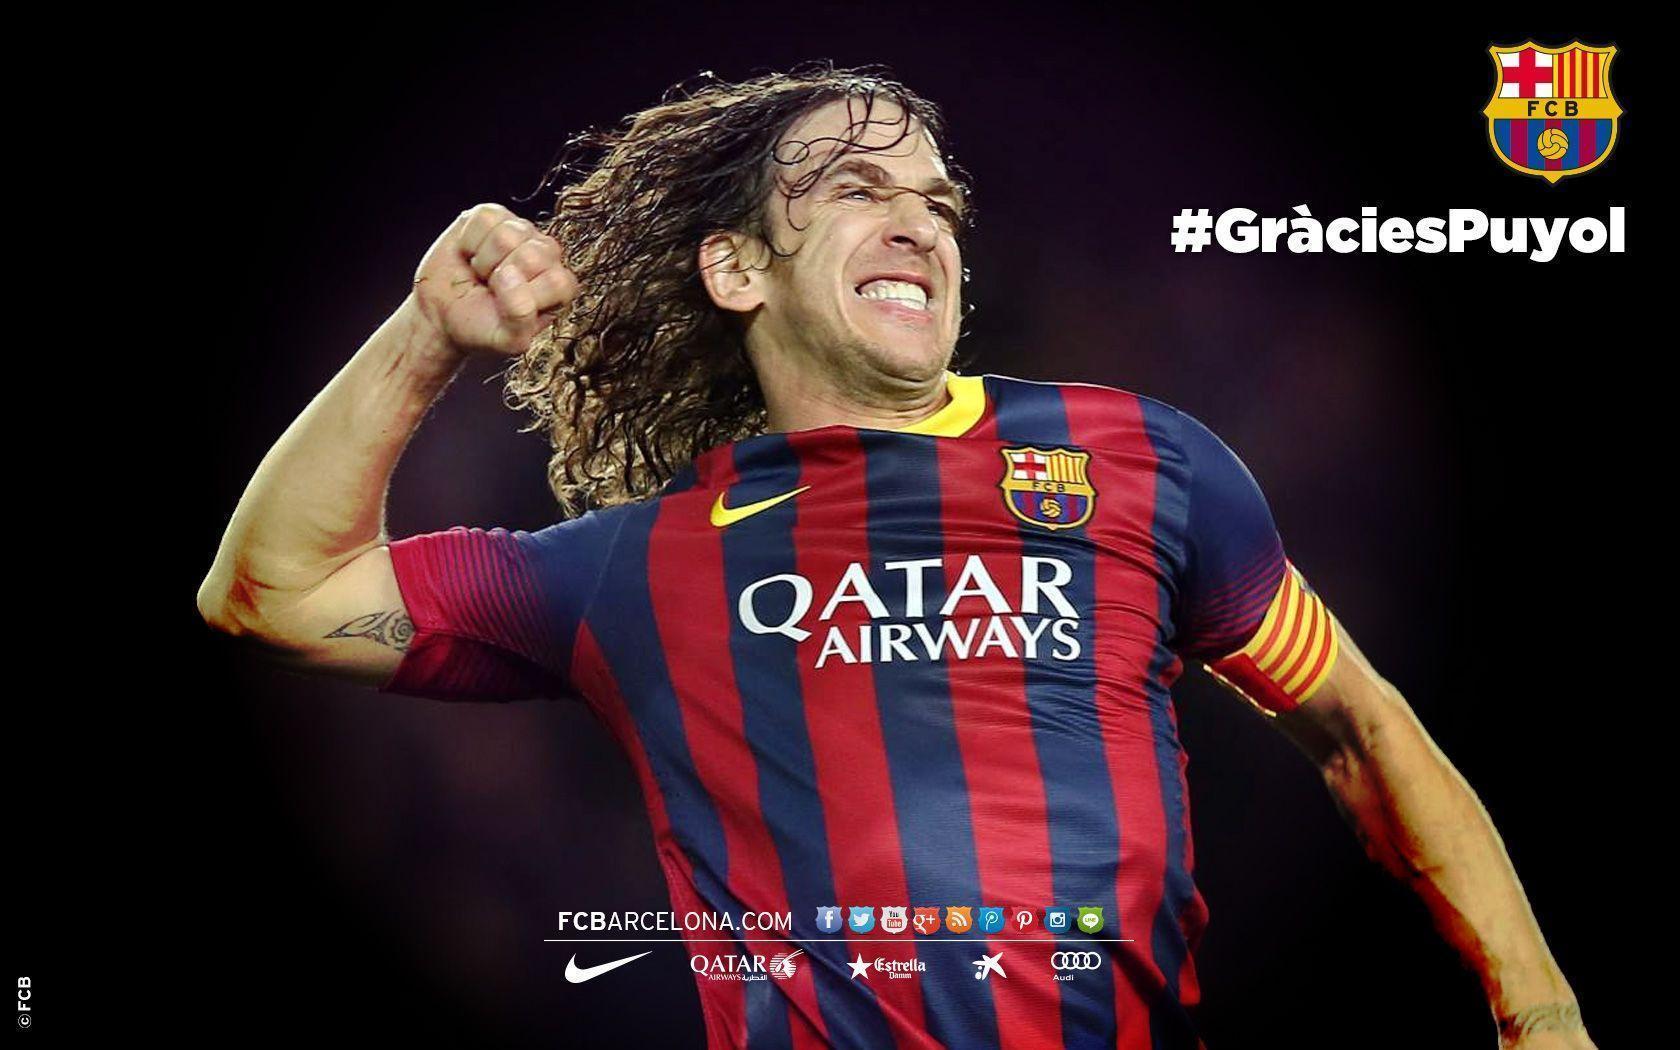 Five Carles Puyol wallpaper for your computer